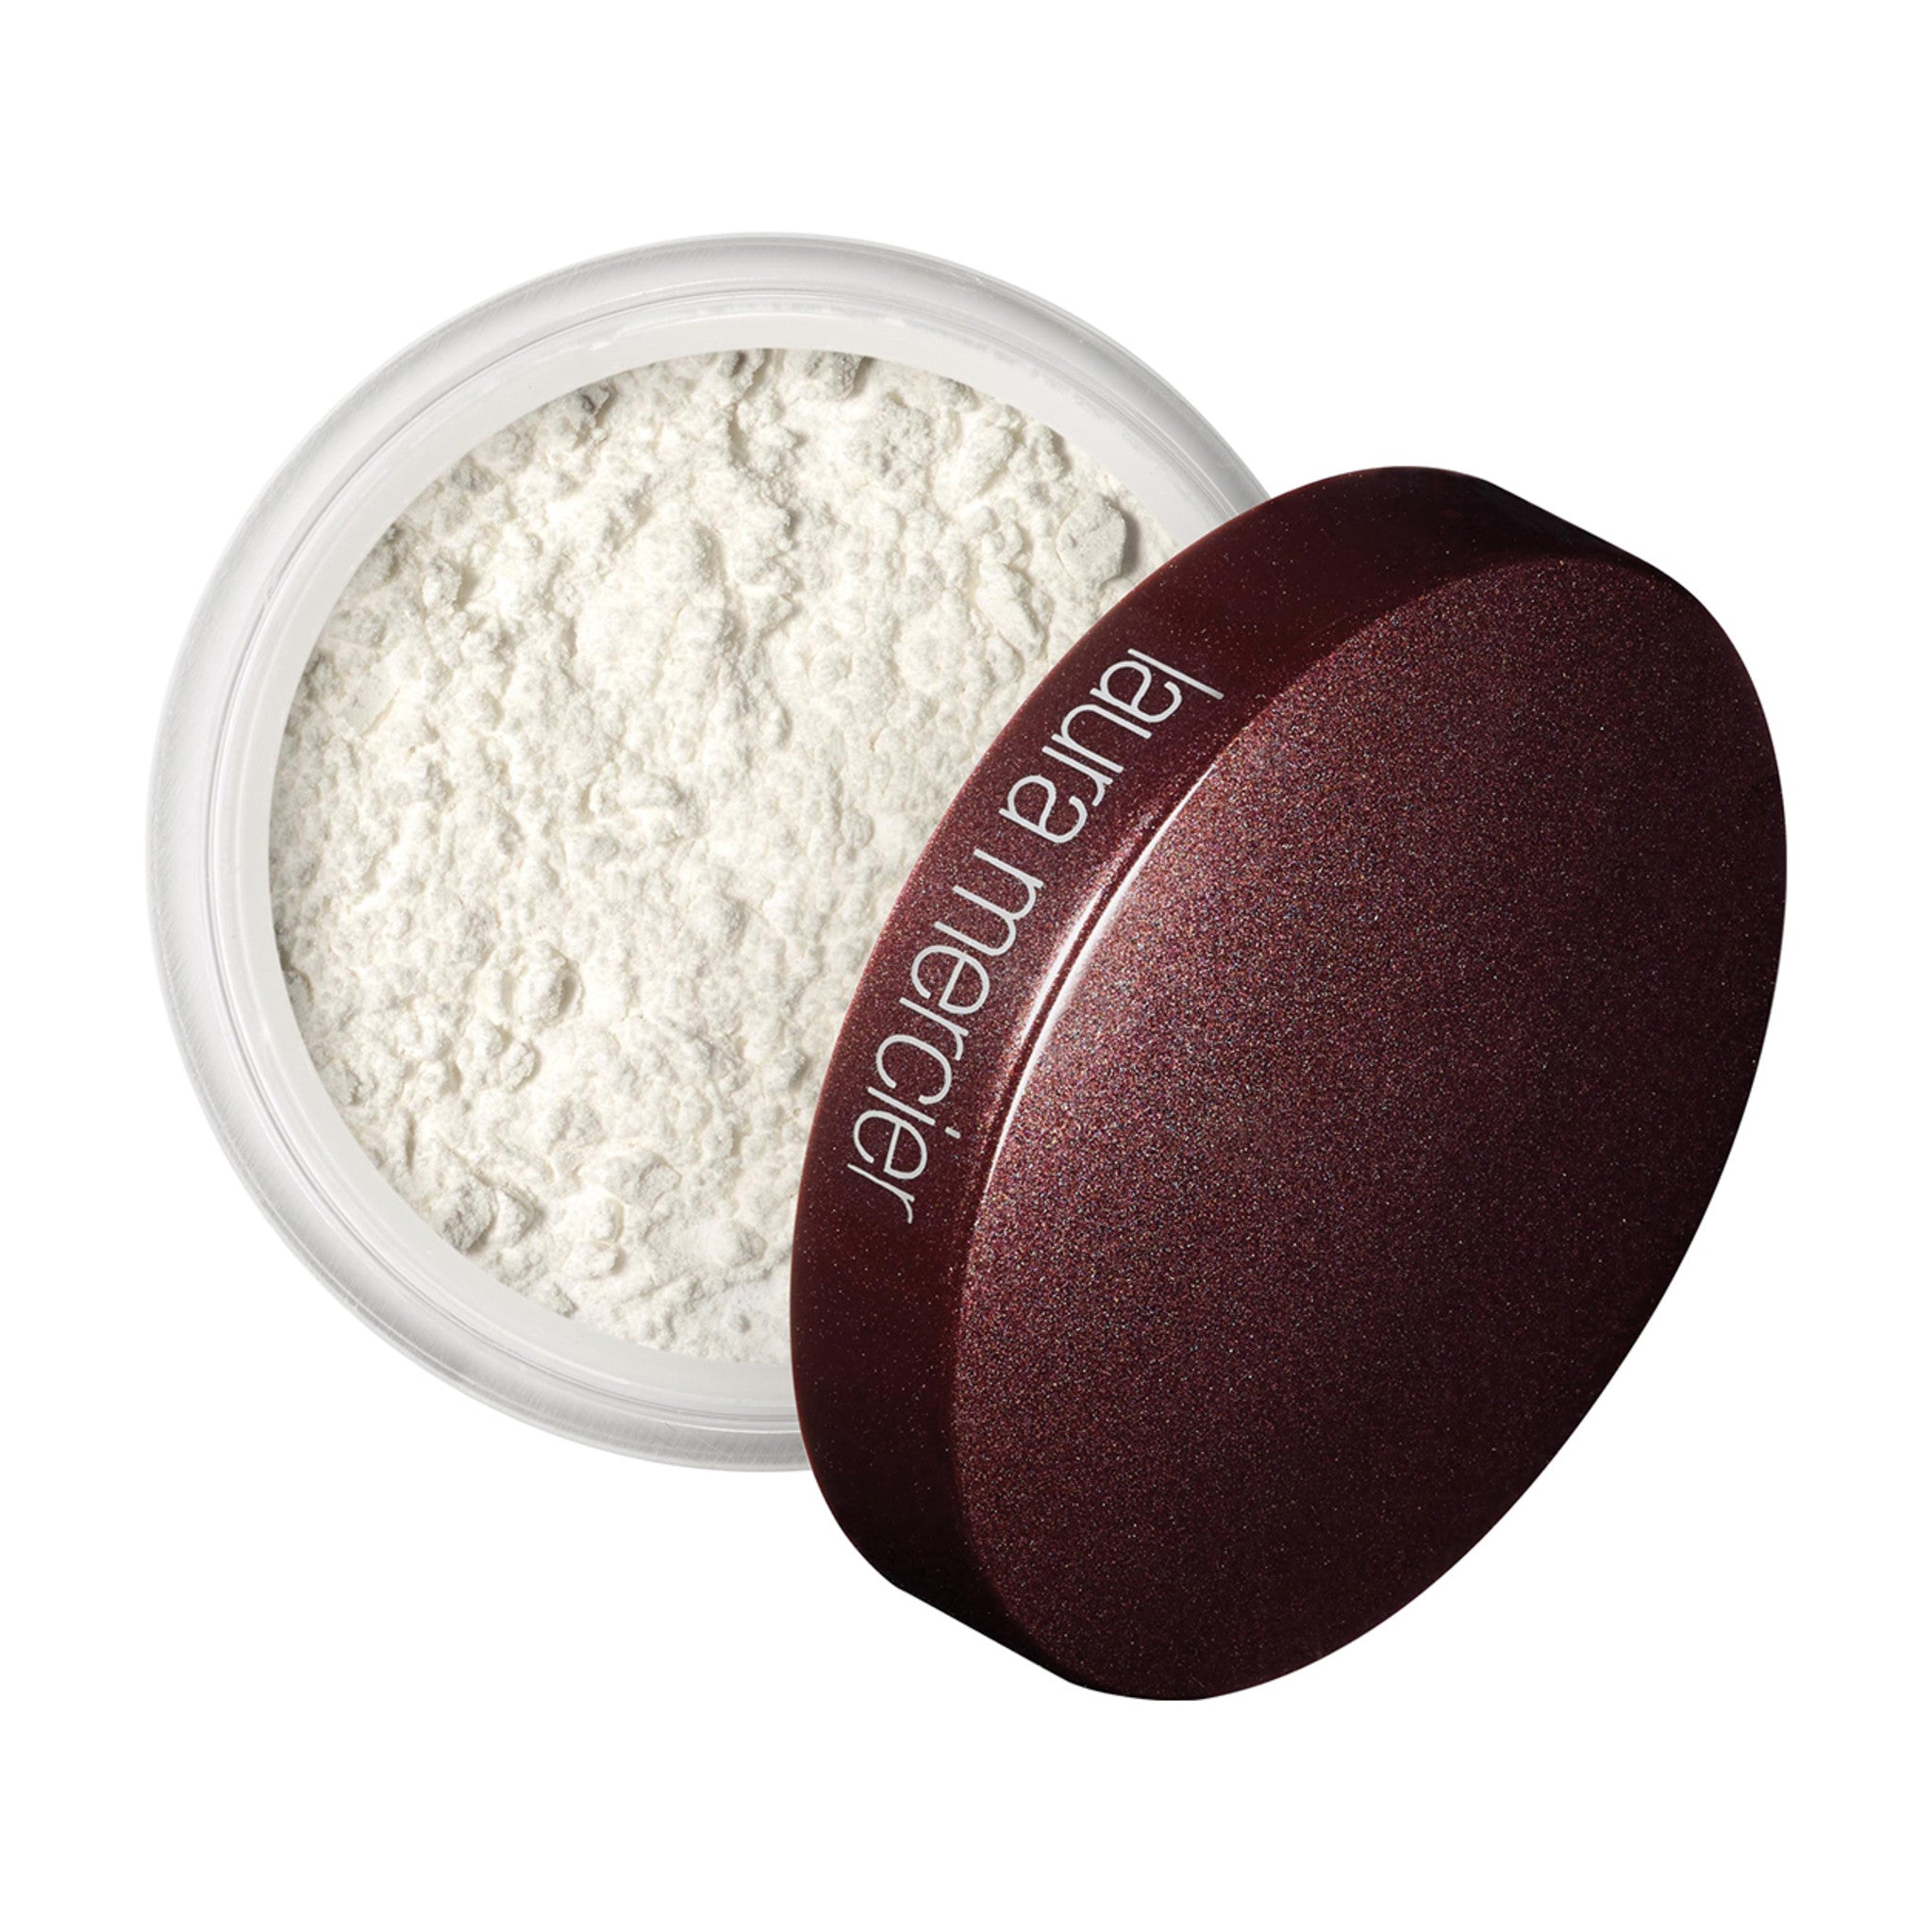 Laura Mercier Secret Brightening Powder main image. This product is in the color white, for light and medium and deep complexions